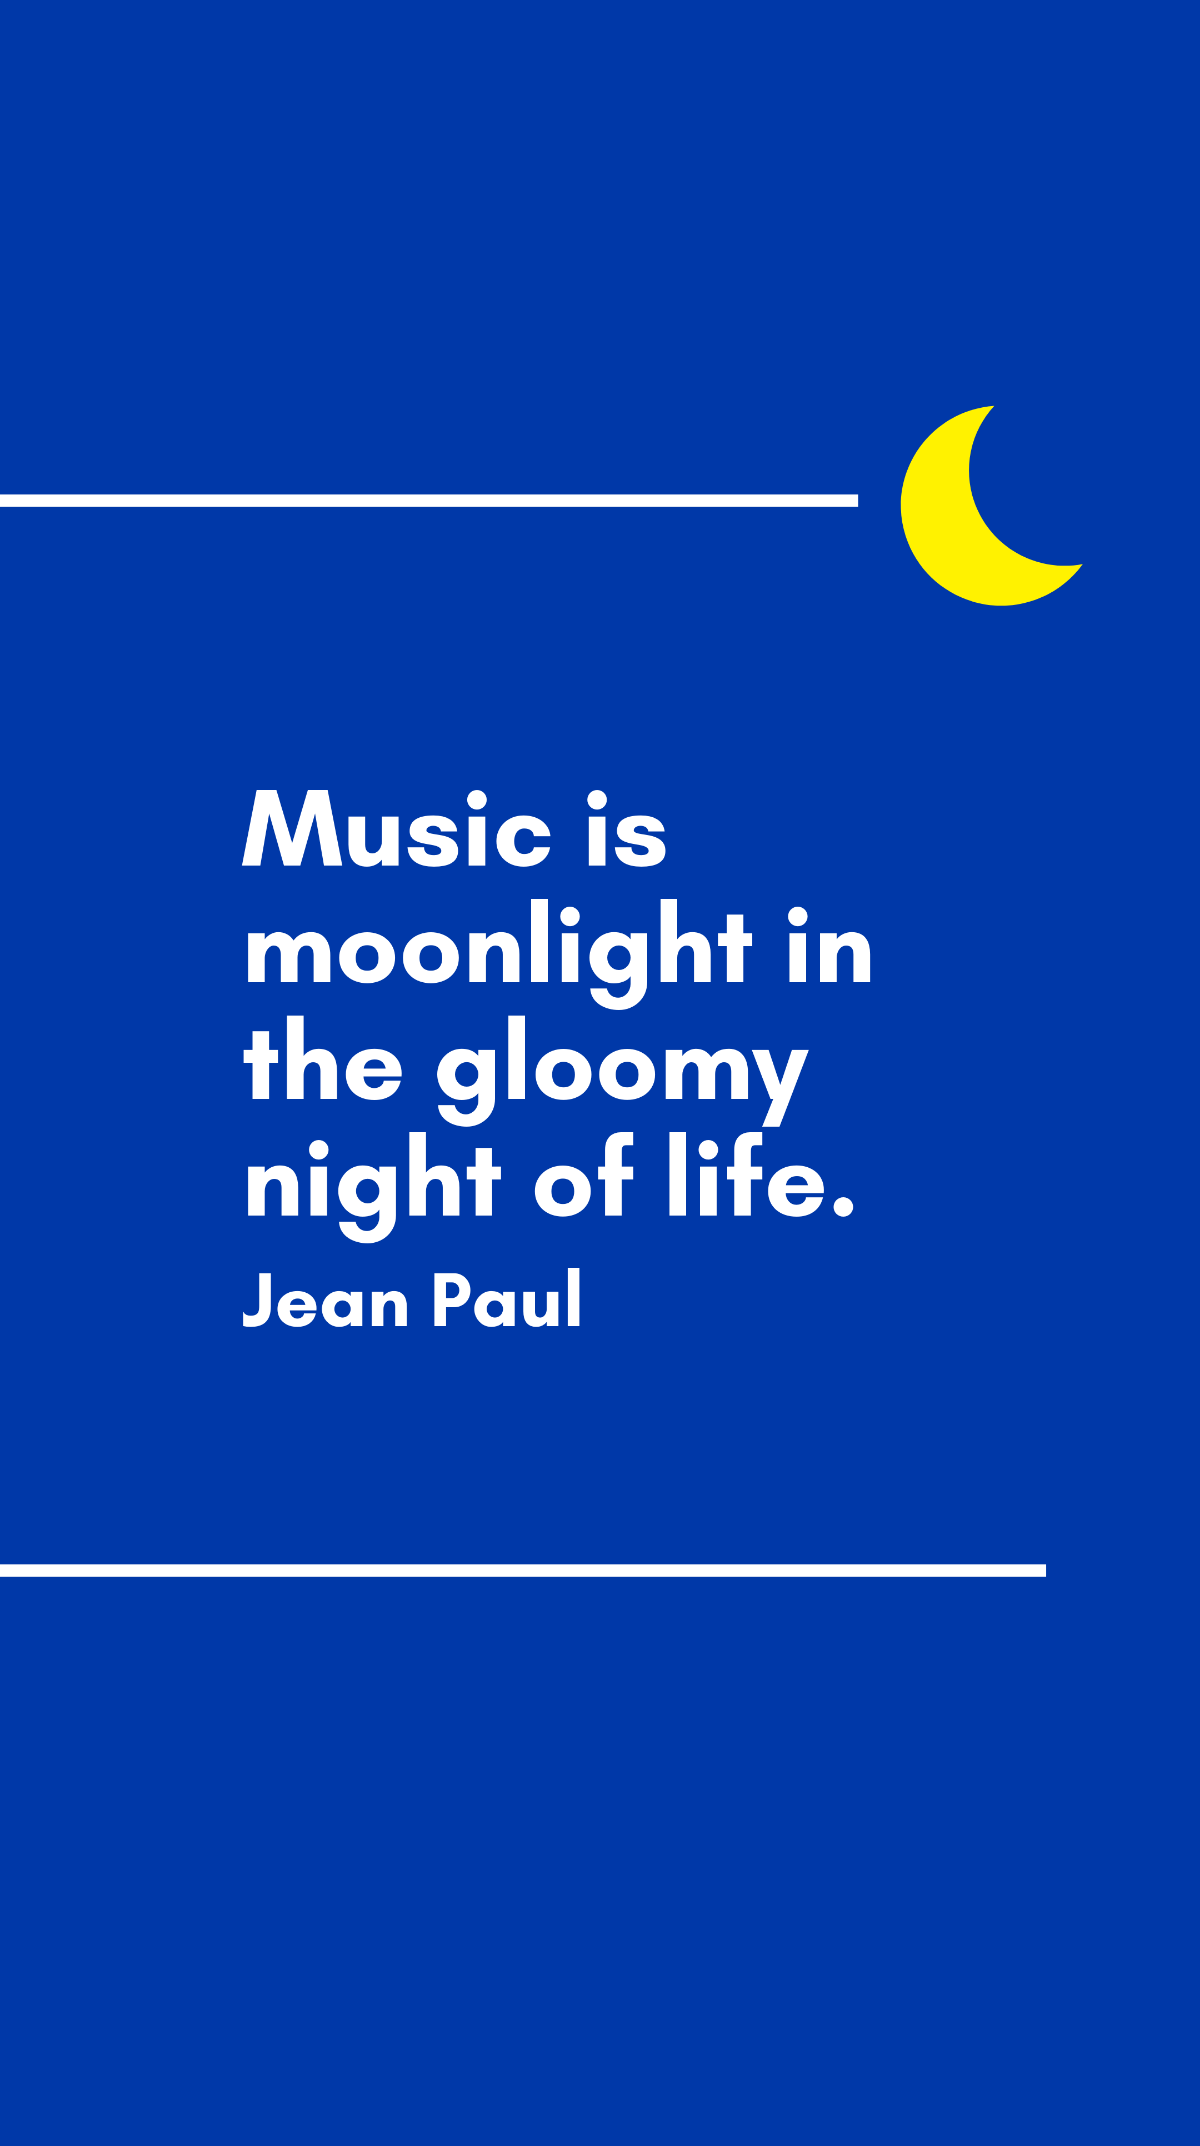 Jean Paul - Music is moonlight in the gloomy night of life. Template